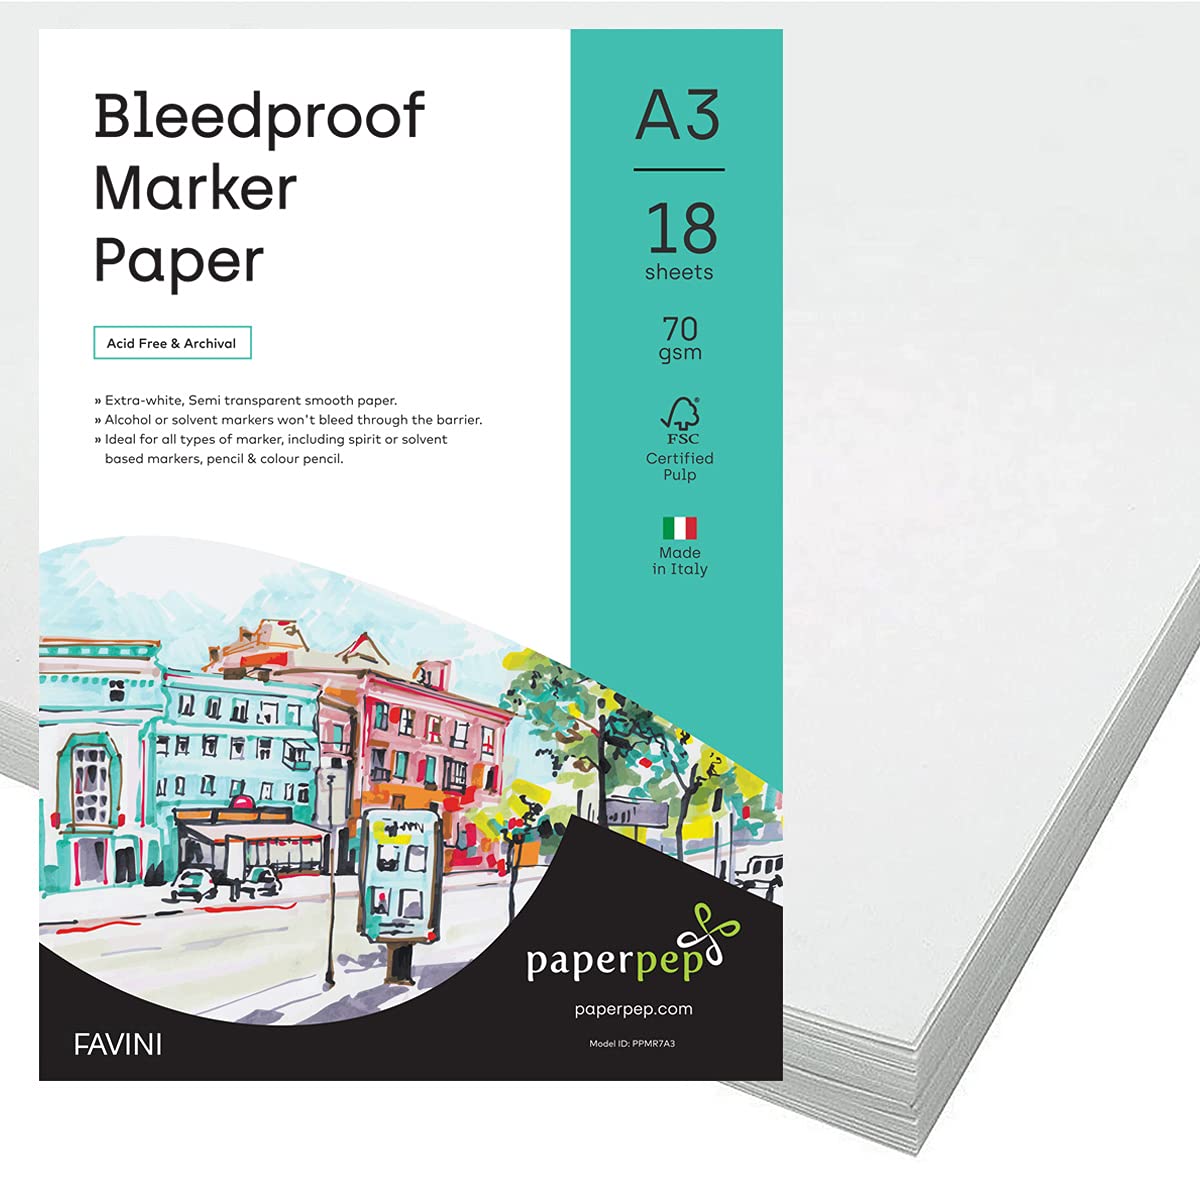 PaperPep Bleedproof Marker Paper 70GSM A3 Pack of 36 for Spirit or Solvent Based Markers, Pencil & Colour Pencil, Illustration, Design & Manga for Artists' & Amateurs